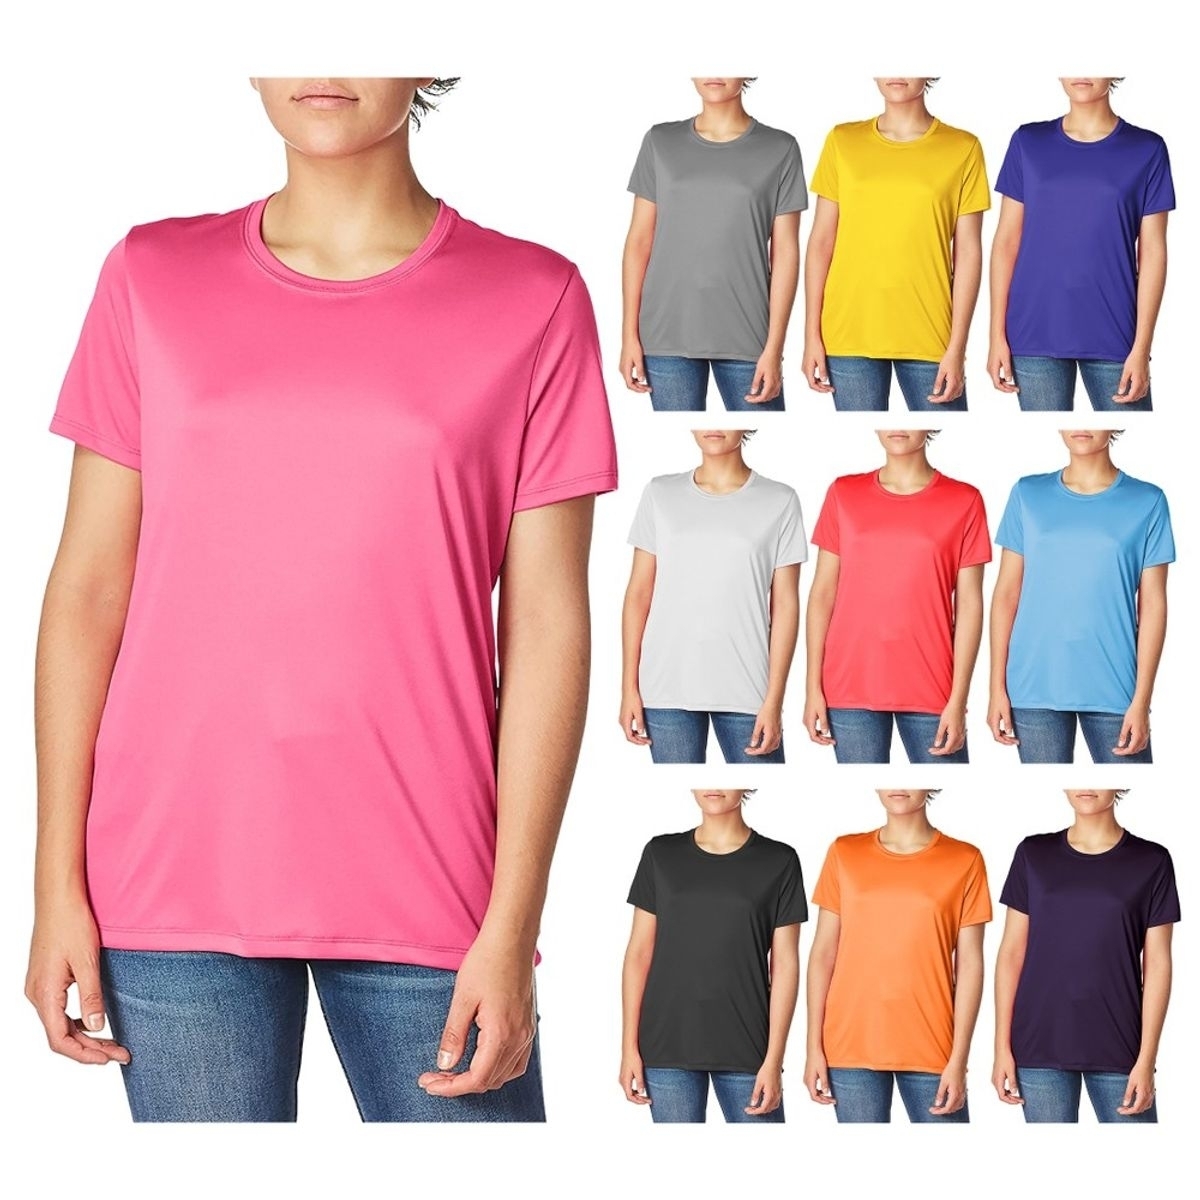 3-Pack: Women's Cool Dri-FIt Moisture Wicking Sim-Fit Long Sleeve Crew Neck T-Shirts - Large